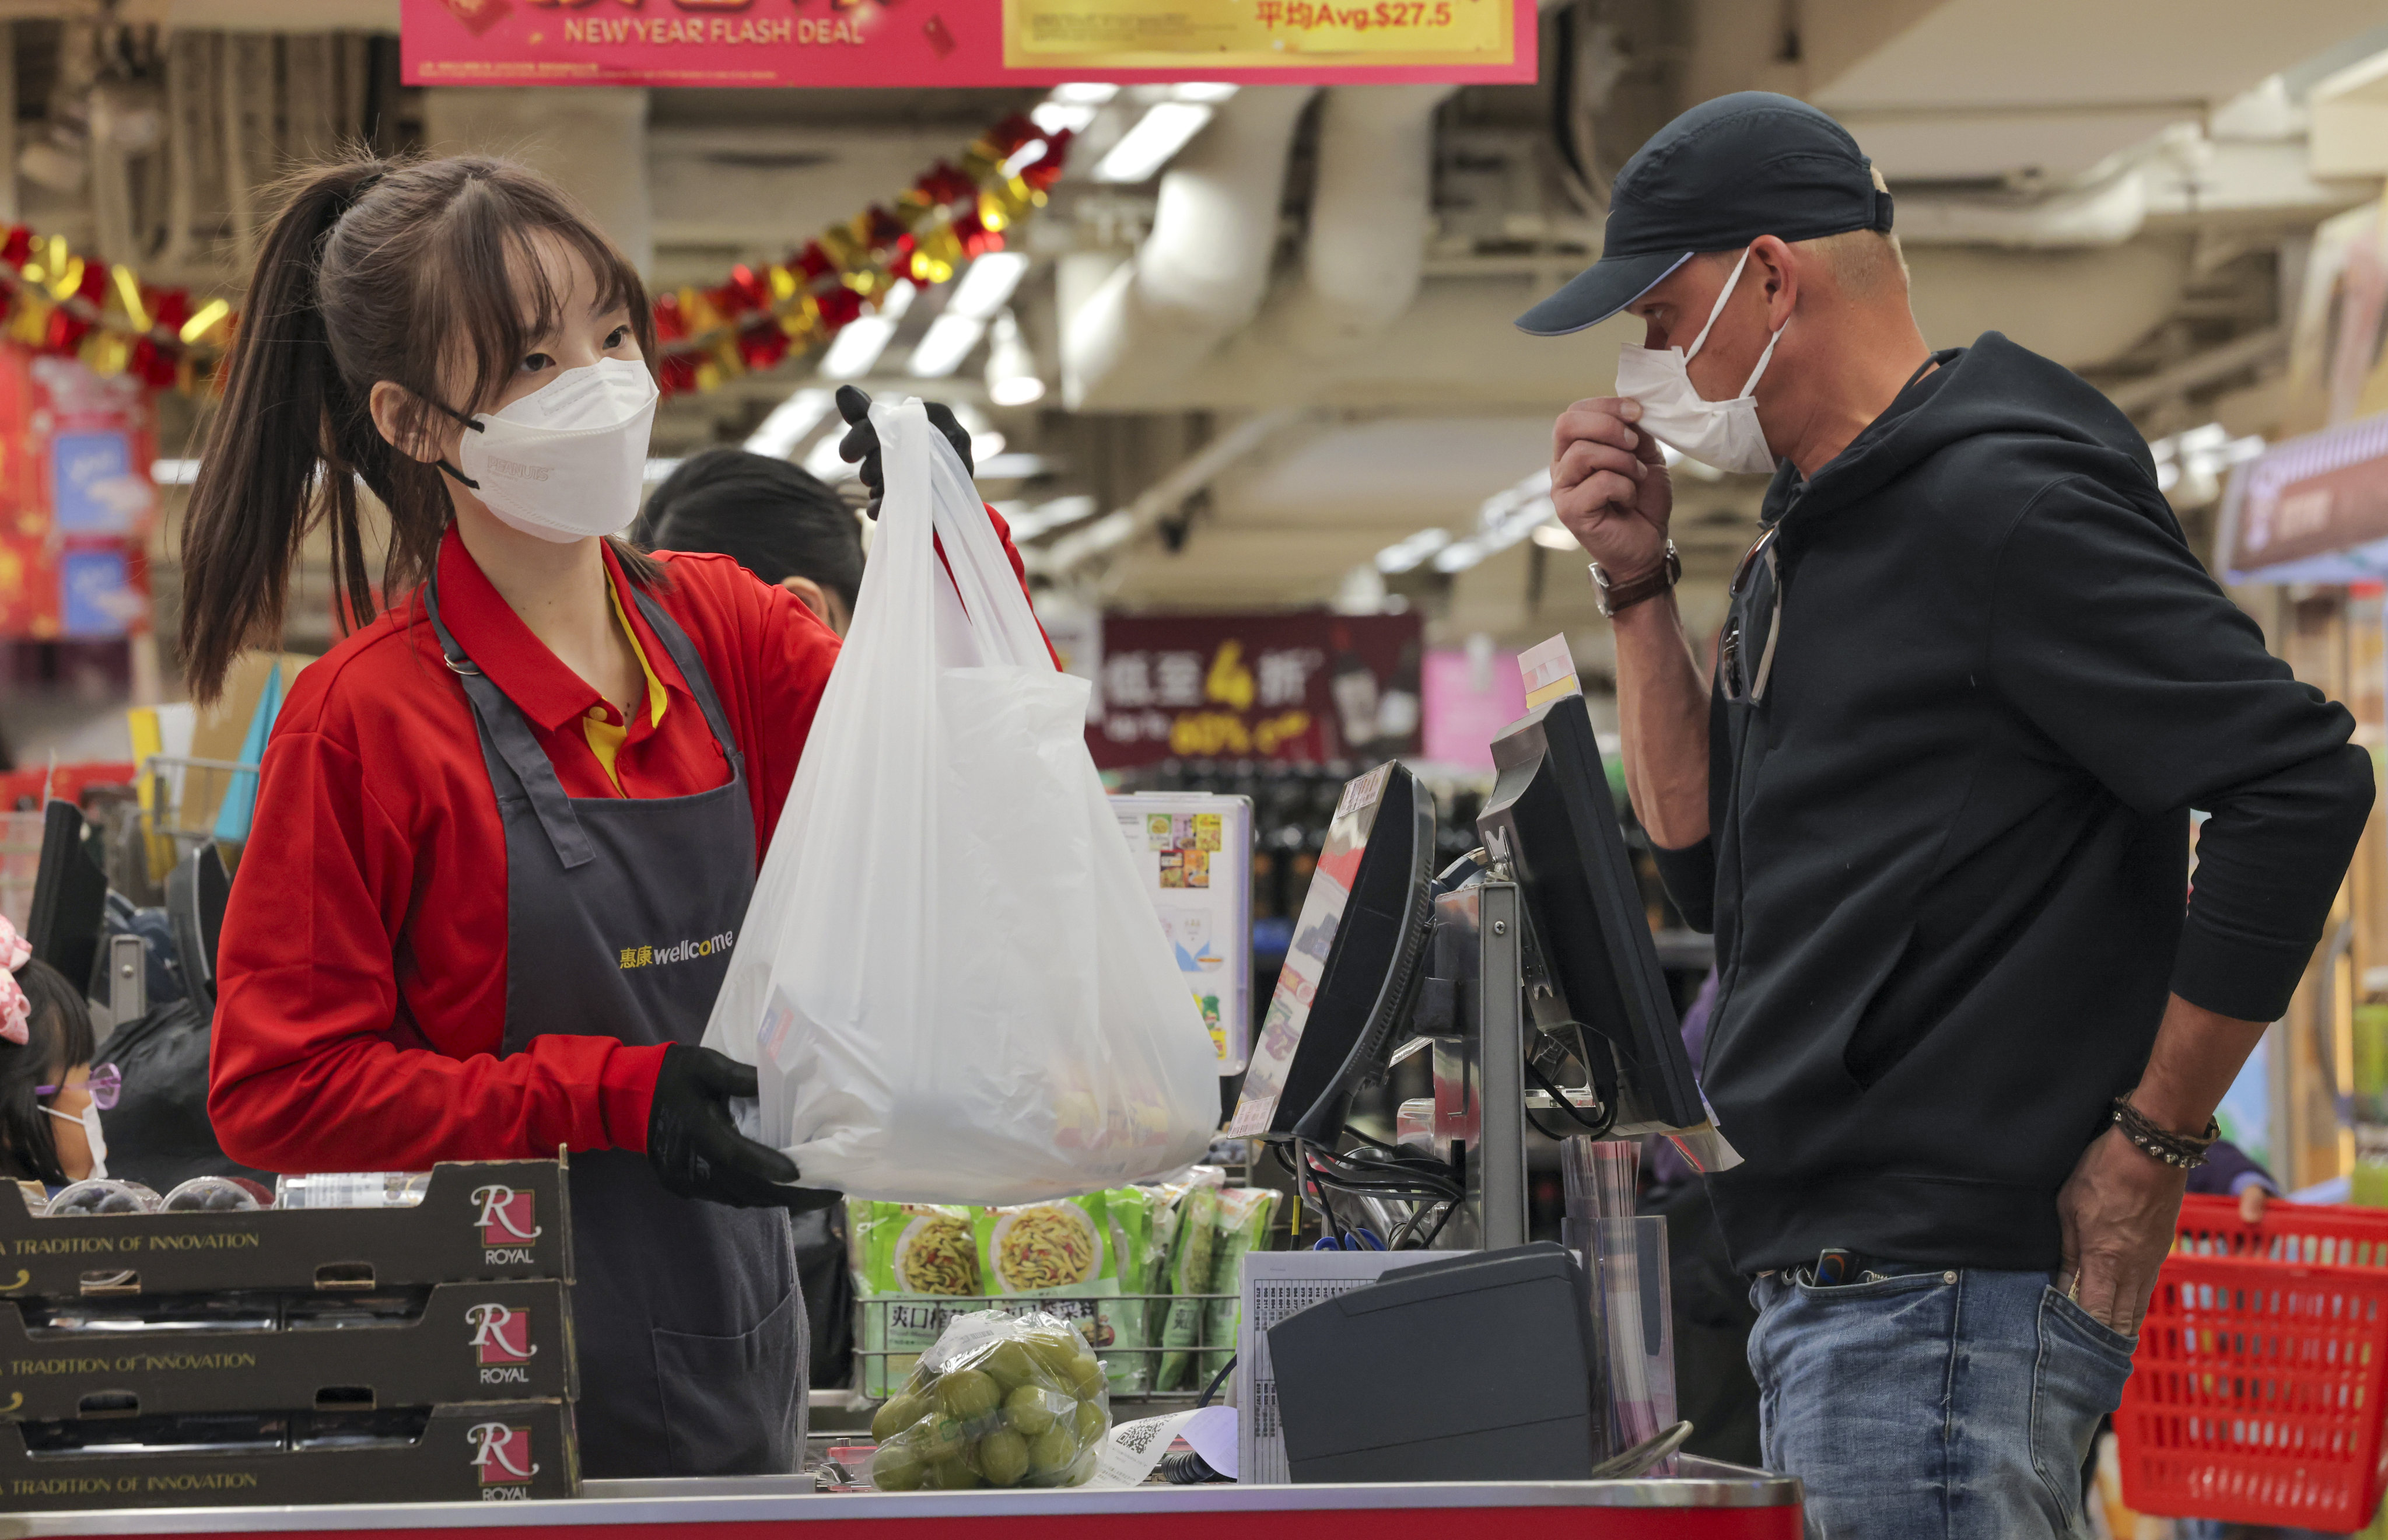 A grocery store cashier in Causeway Bay hands a customer a plastic bag on December 31 last year. Hongkongers have started paying HK$1 for each plastic bag at supermarkets, the first increase in the plastic bag levy in 13 years. Photo: Jelly Tse